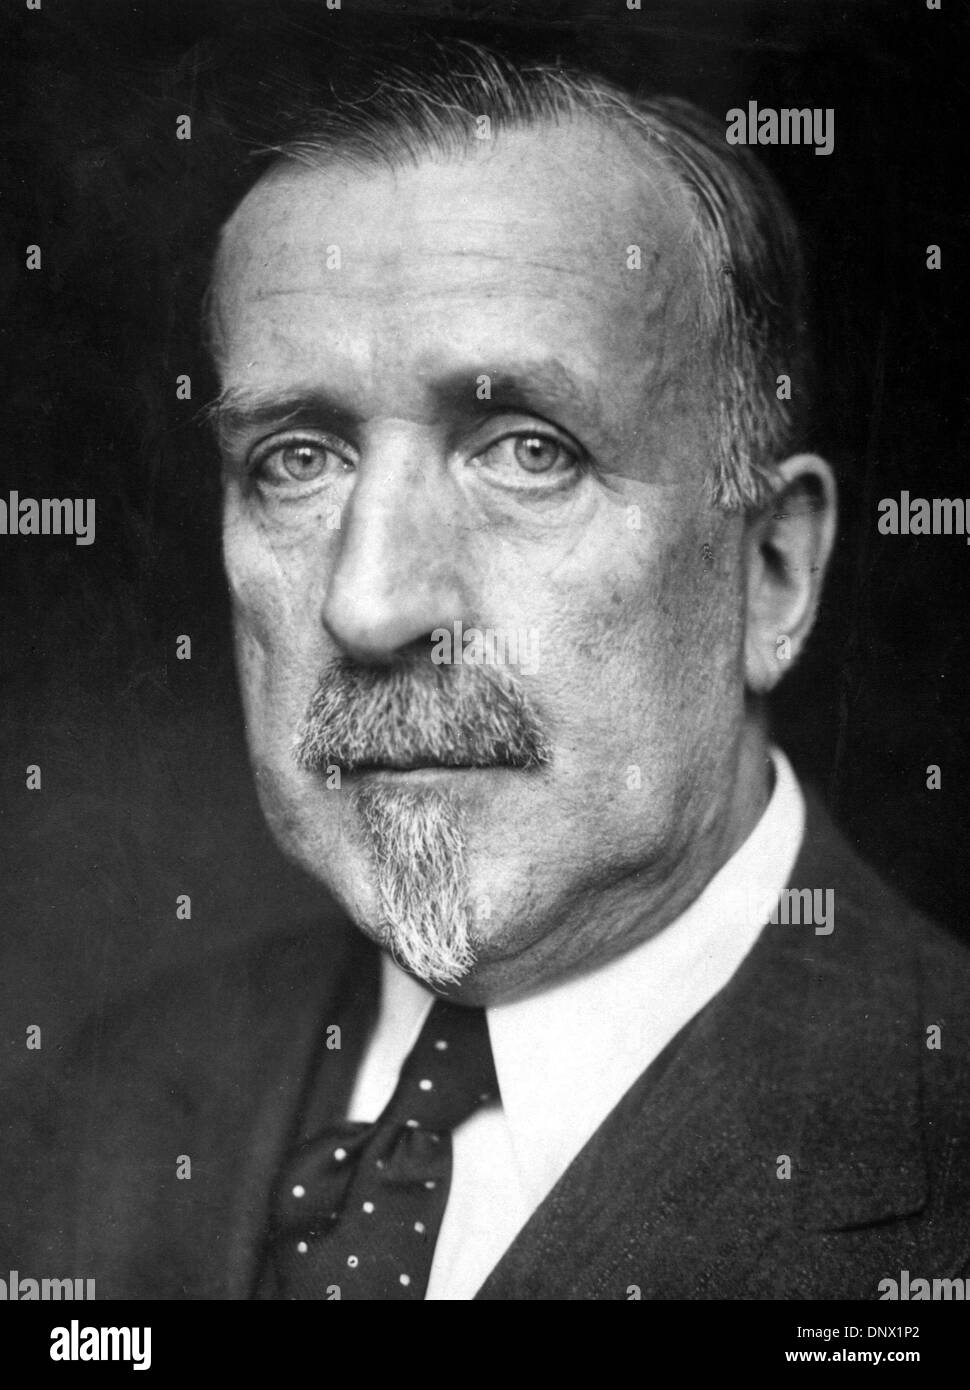 Jan. 1, 1930 - Berlin, Germany -  HEINRICH MANN, born Luiz Heinrich Mann (March 27, 1871-March 11, 1950) was a novelist who wrote works with a strong social theme, which led to his exile in 1933. (Credit Image: © KEYSTONE Pictures USA/ZUMAPRESS.com) Stock Photo